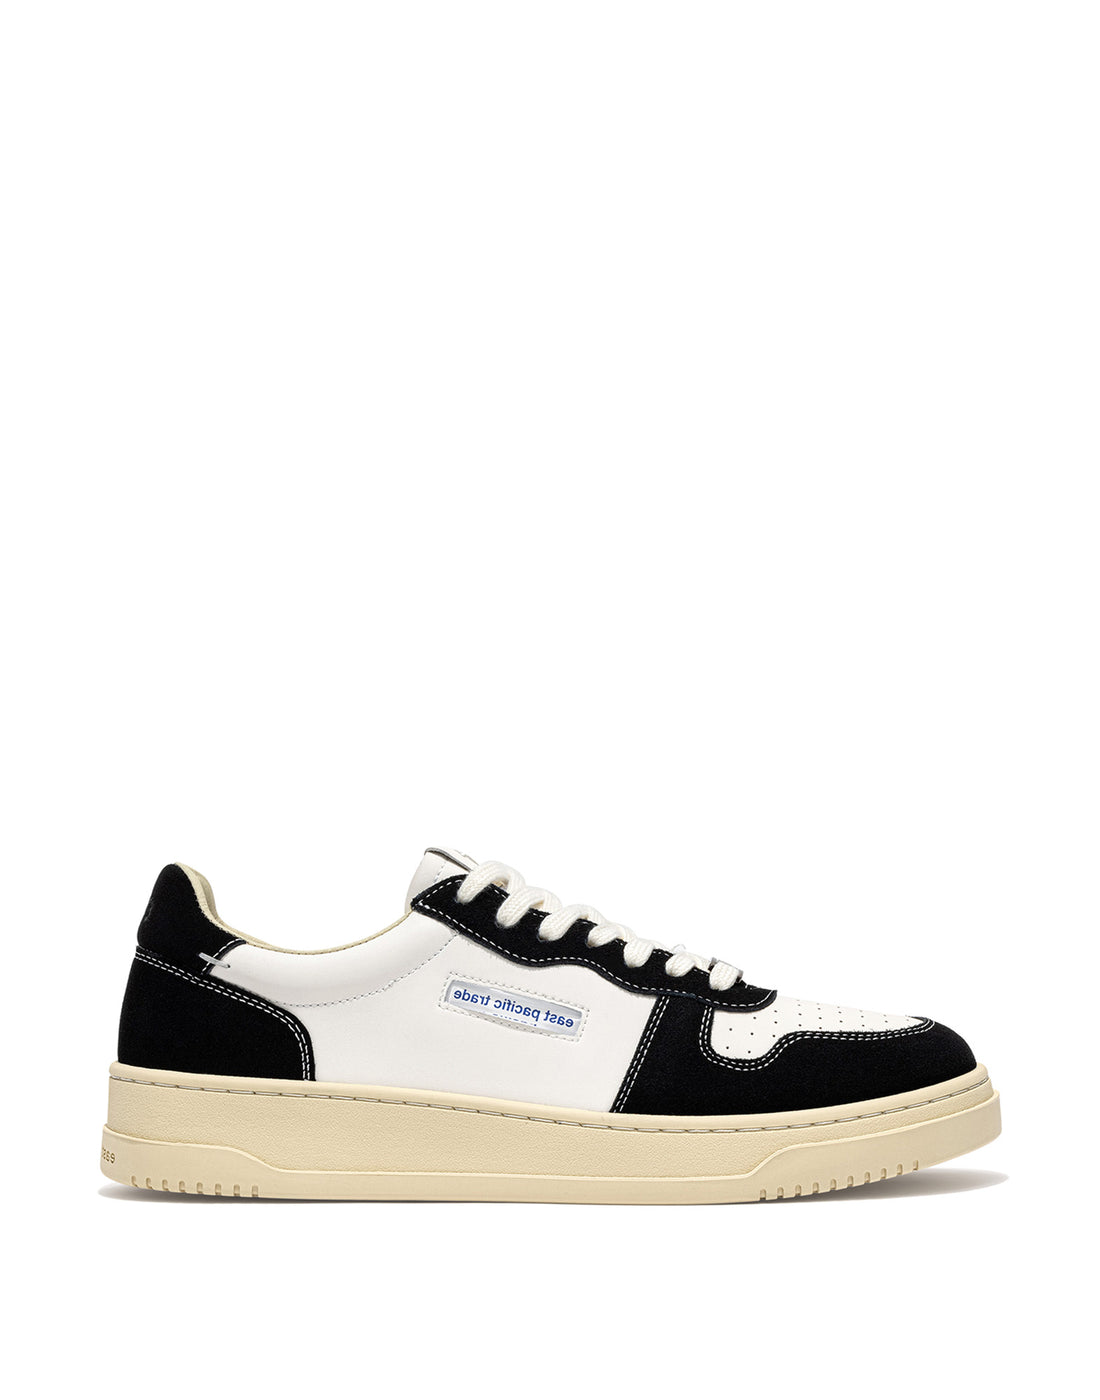 EPT Sneakers Court Suede Black/Off White